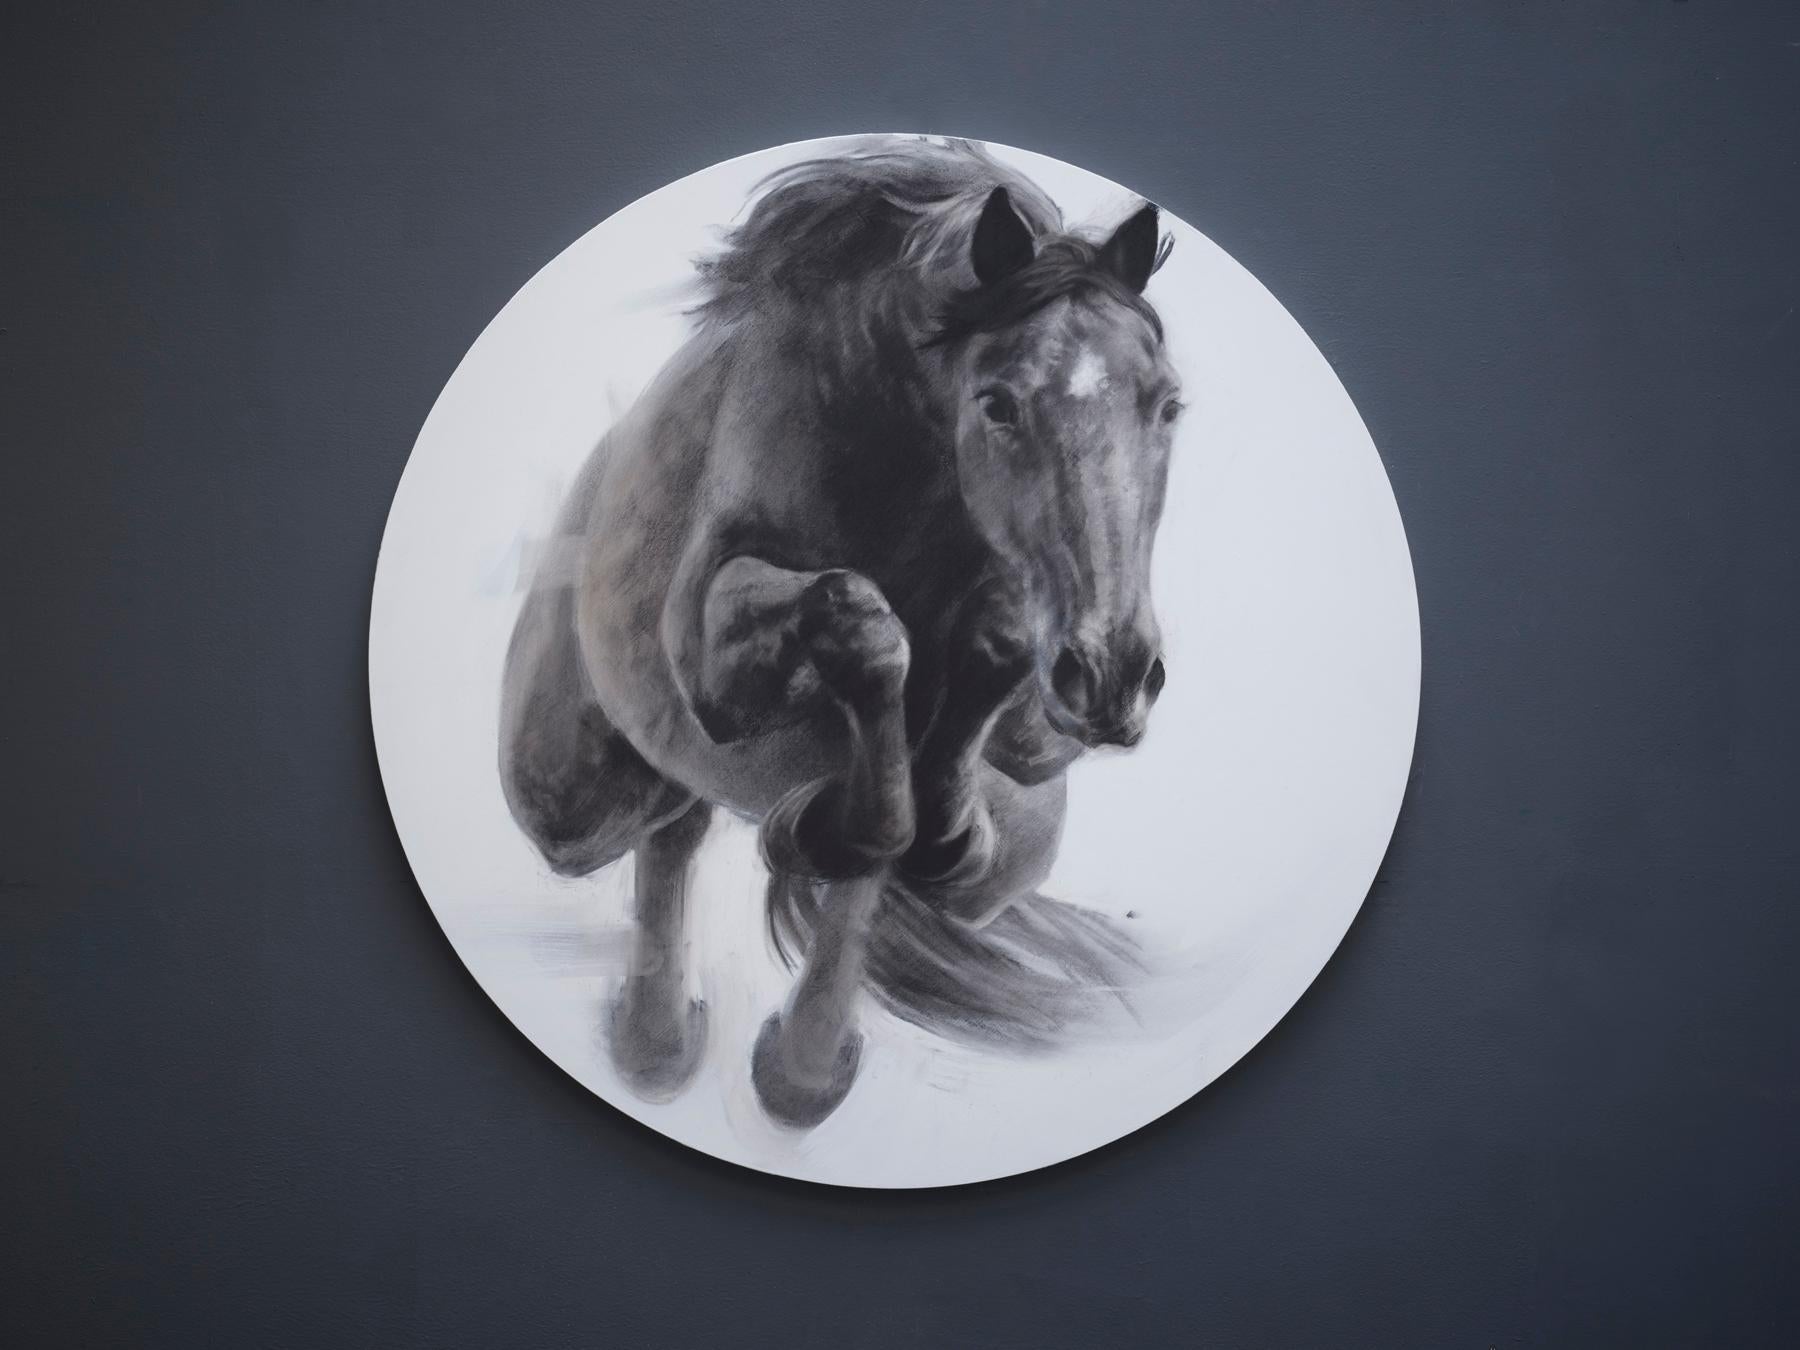  Eclipse, Jumping Horse Drawing, Charcoal, gesso and acrylic on circular board